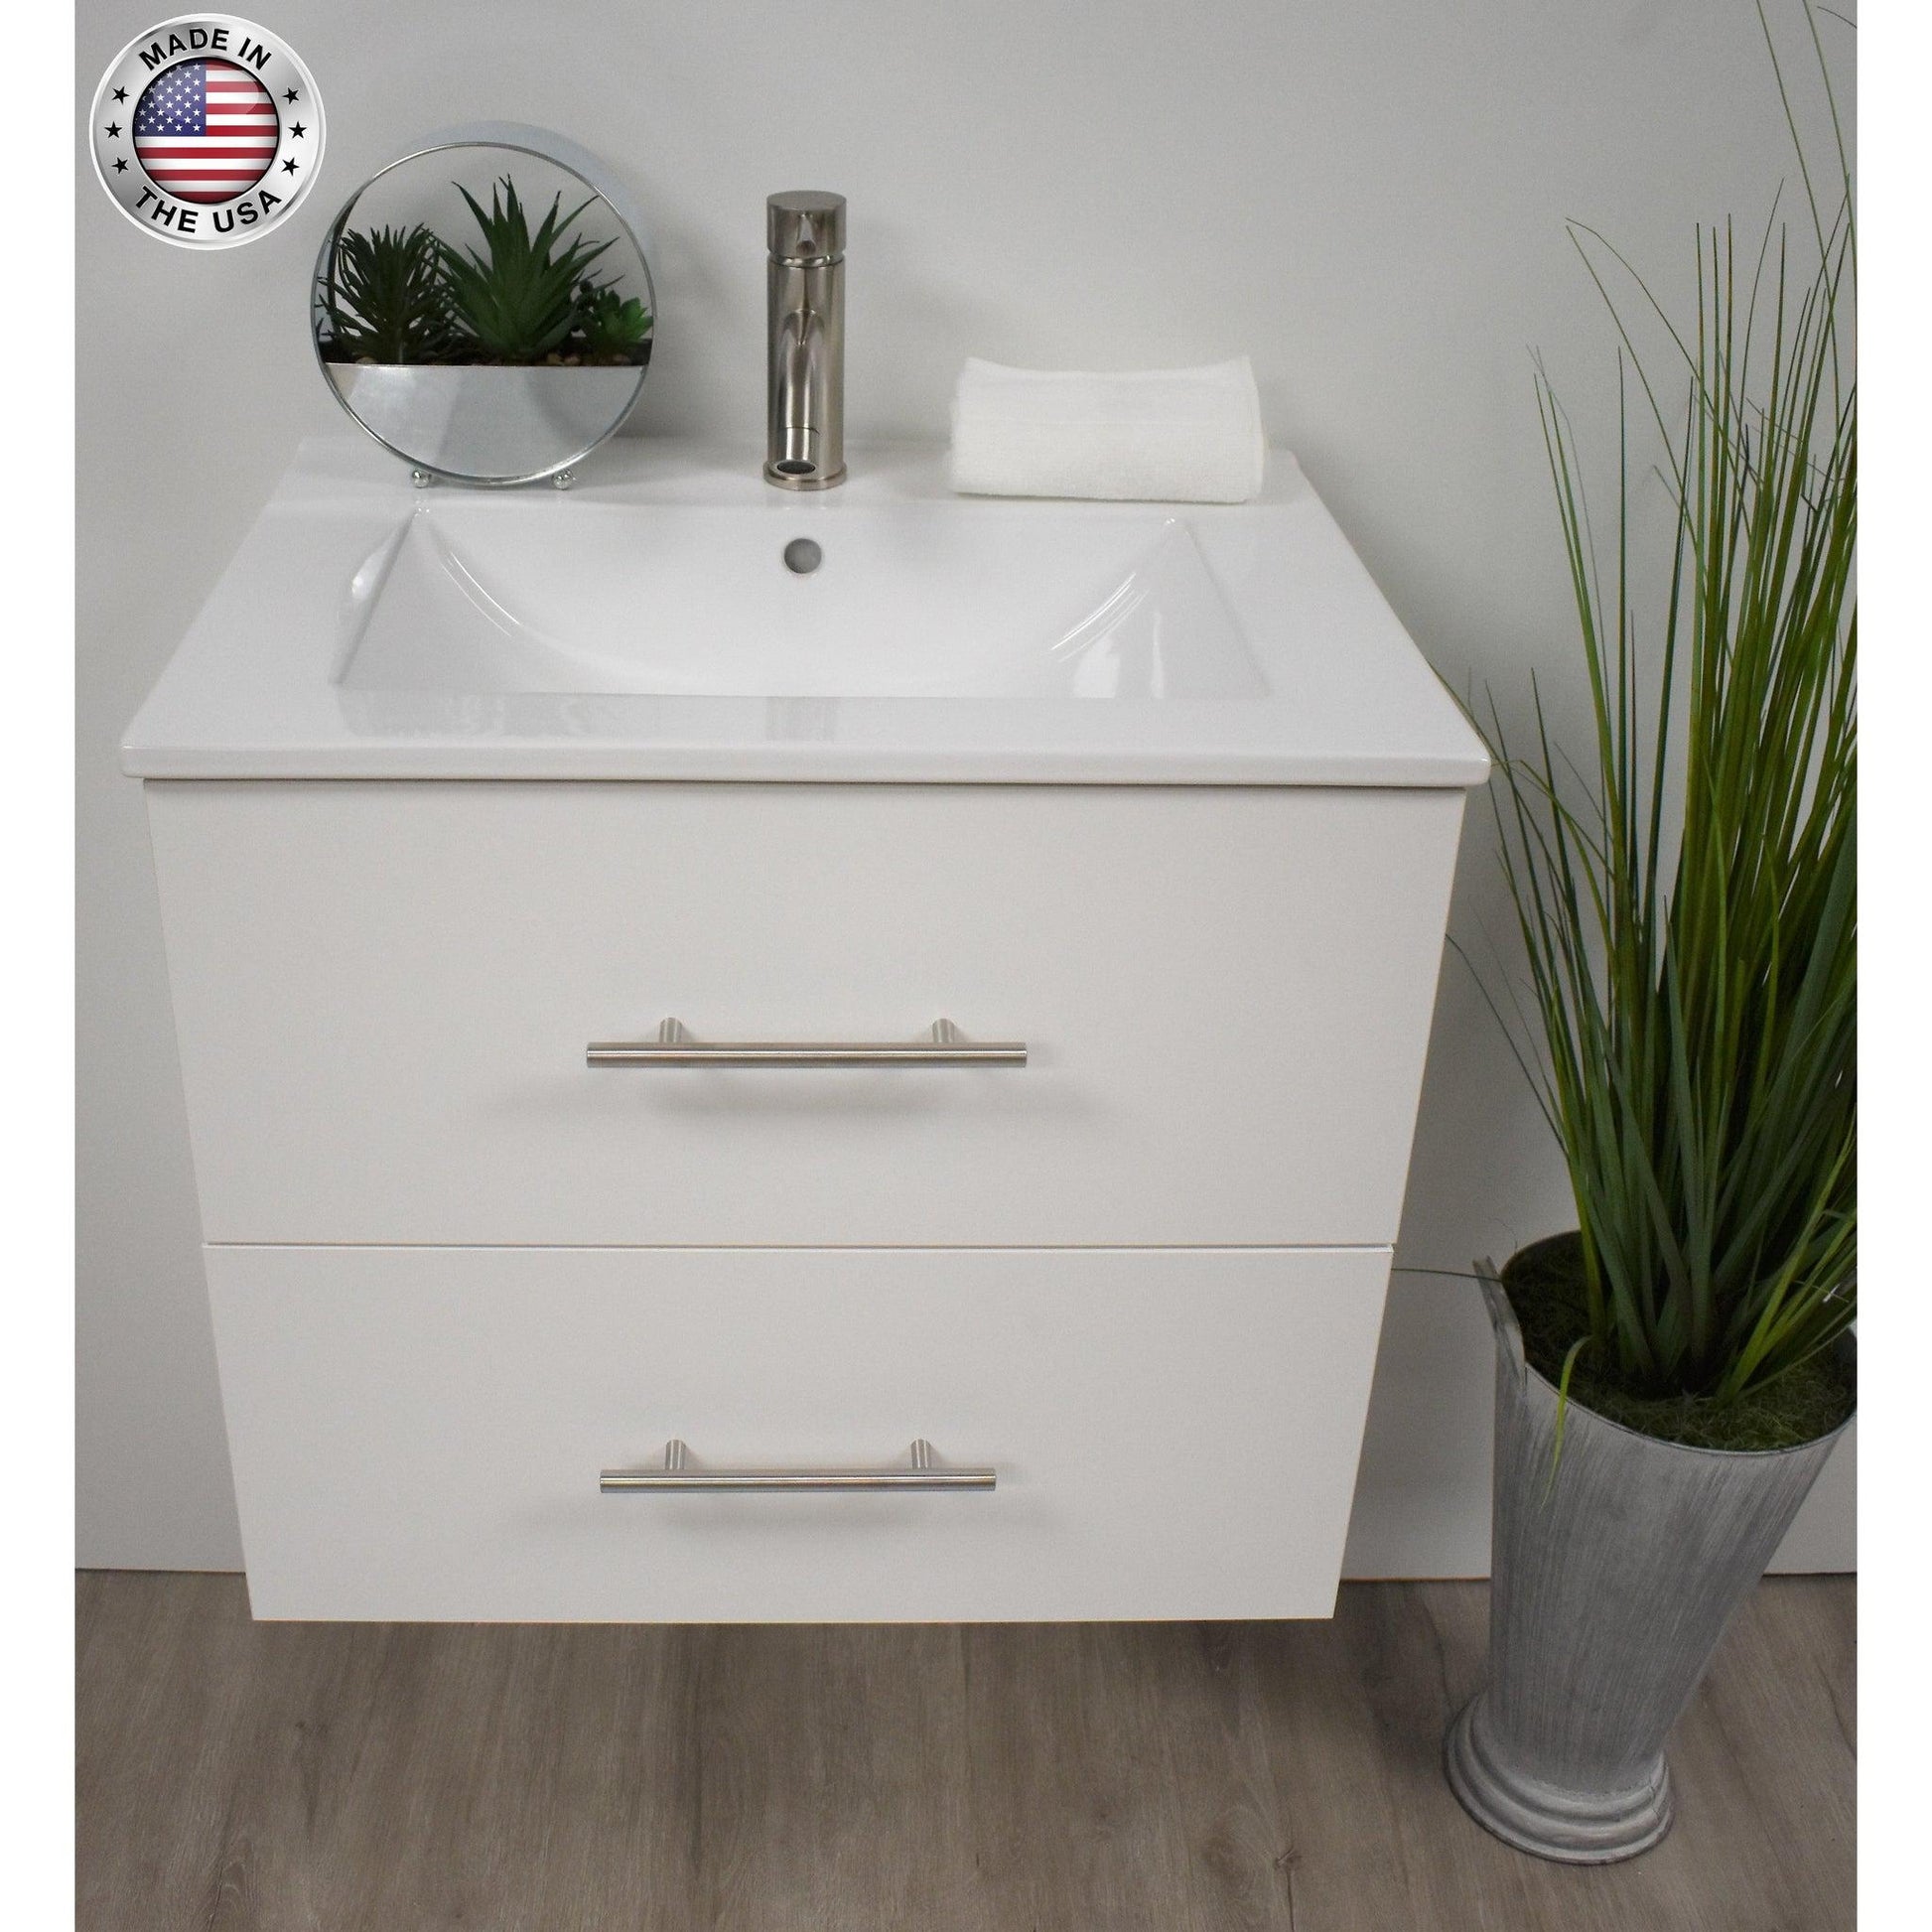 https://usbathstore.com/cdn/shop/products/Volpa-USA-Napa-30-White-Wall-Mounted-Floating-Modern-Bathroom-Vanity-With-Integrated-Ceramic-Top-and-Satin-Nickel-Round-Handles-14.jpg?v=1651431586&width=1946